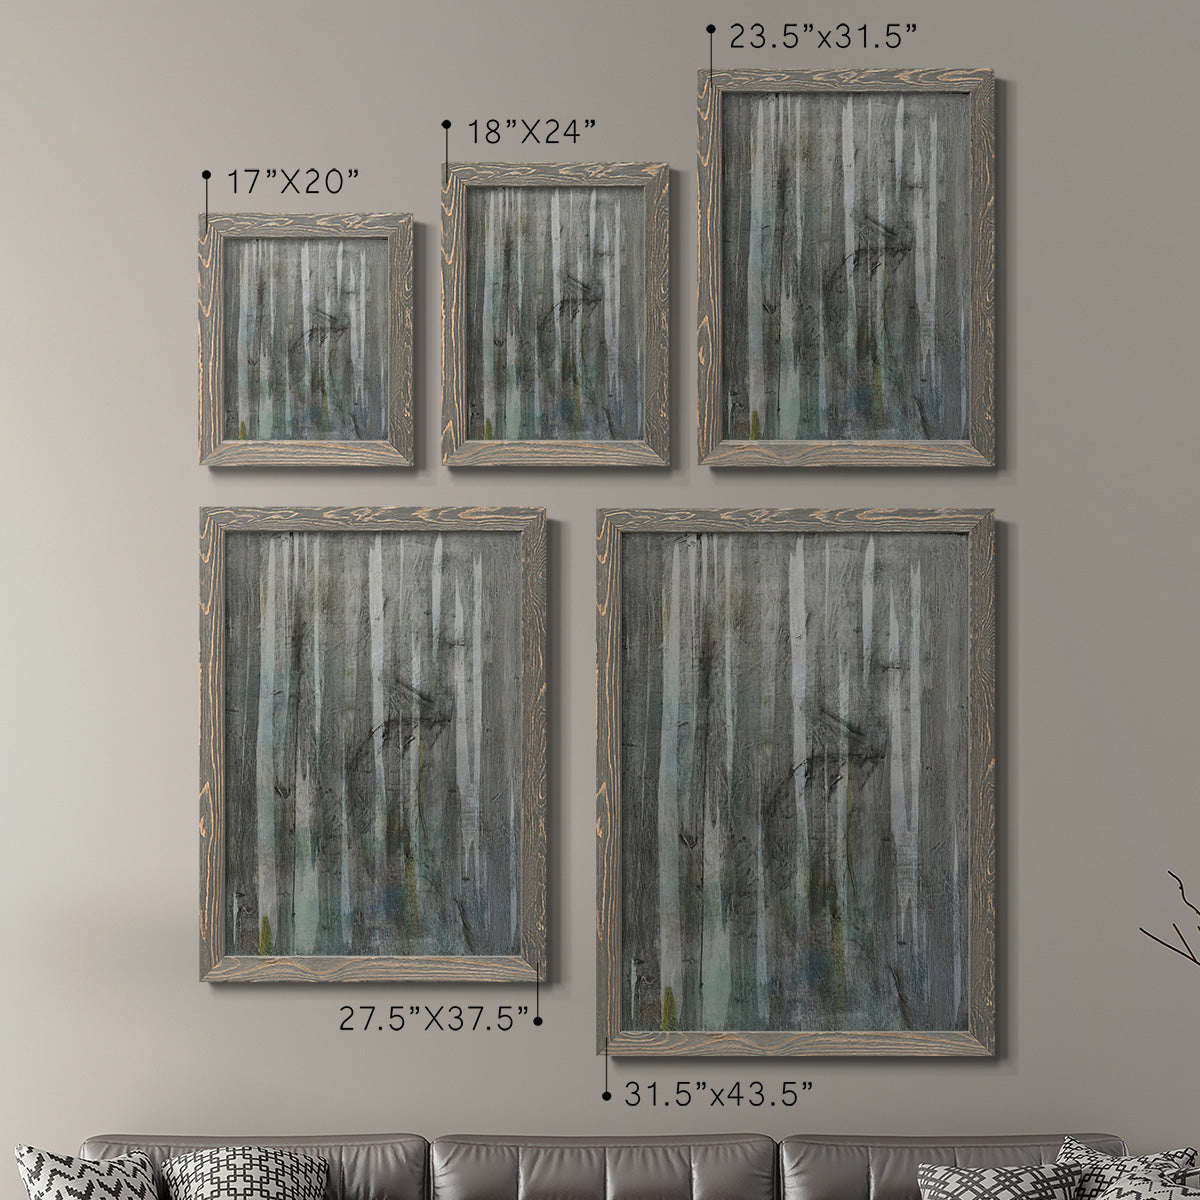 Birch Forest Abstracts I - Premium Framed Canvas 2 Piece Set - Ready to Hang